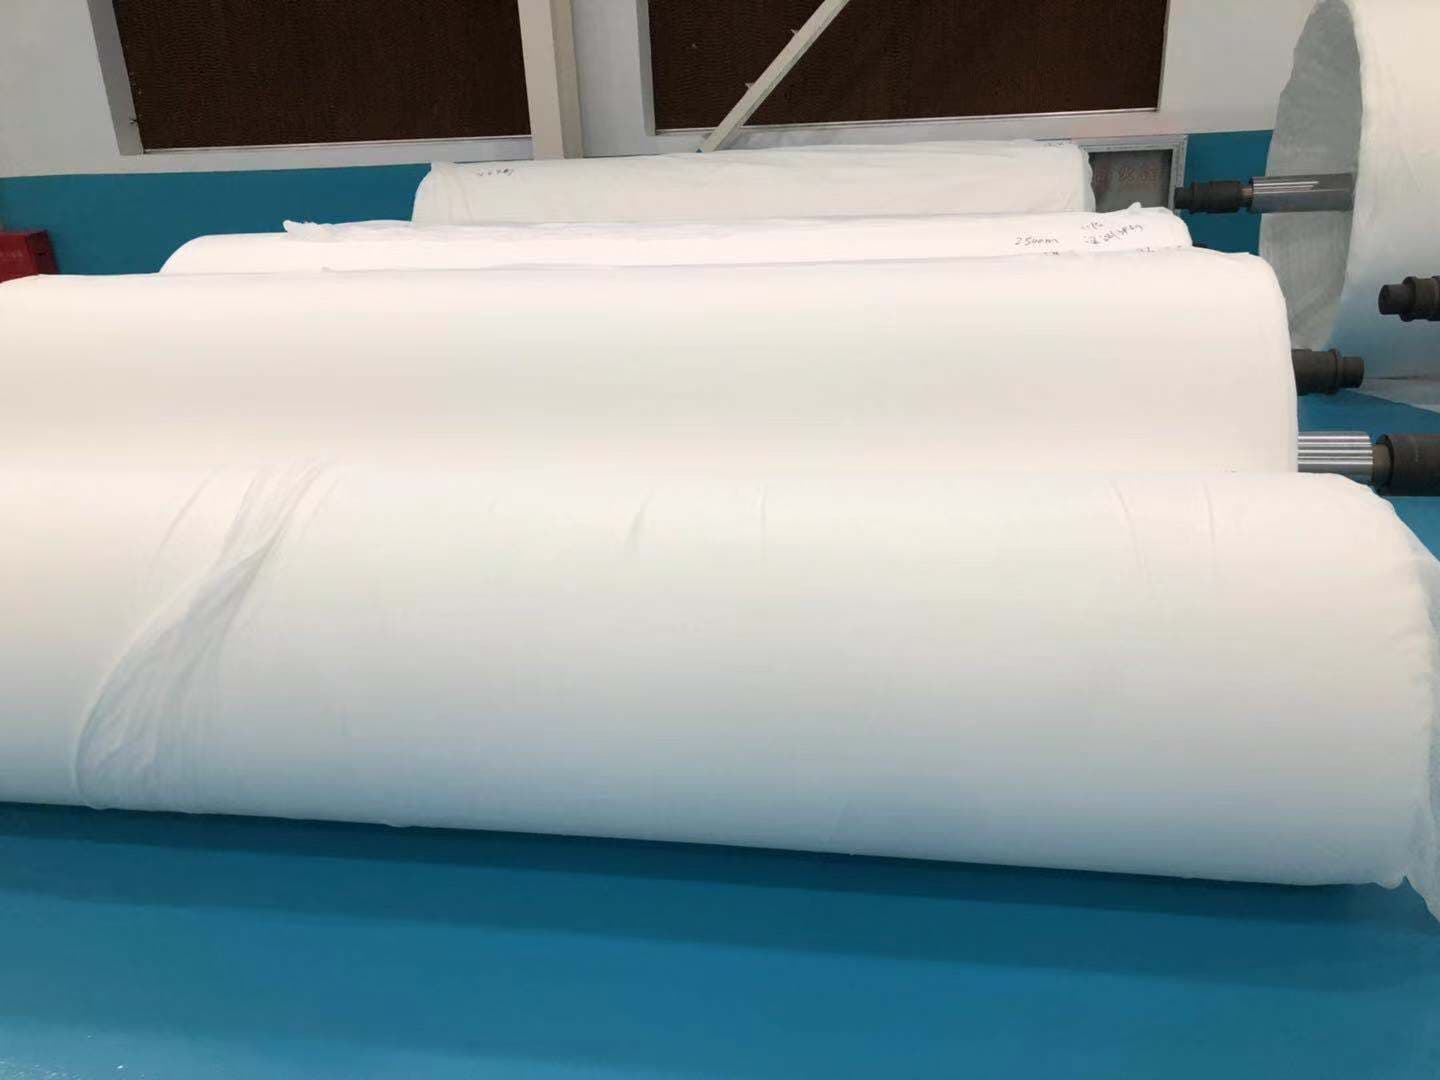 Spunlace nonwoven fabric for wet wipes